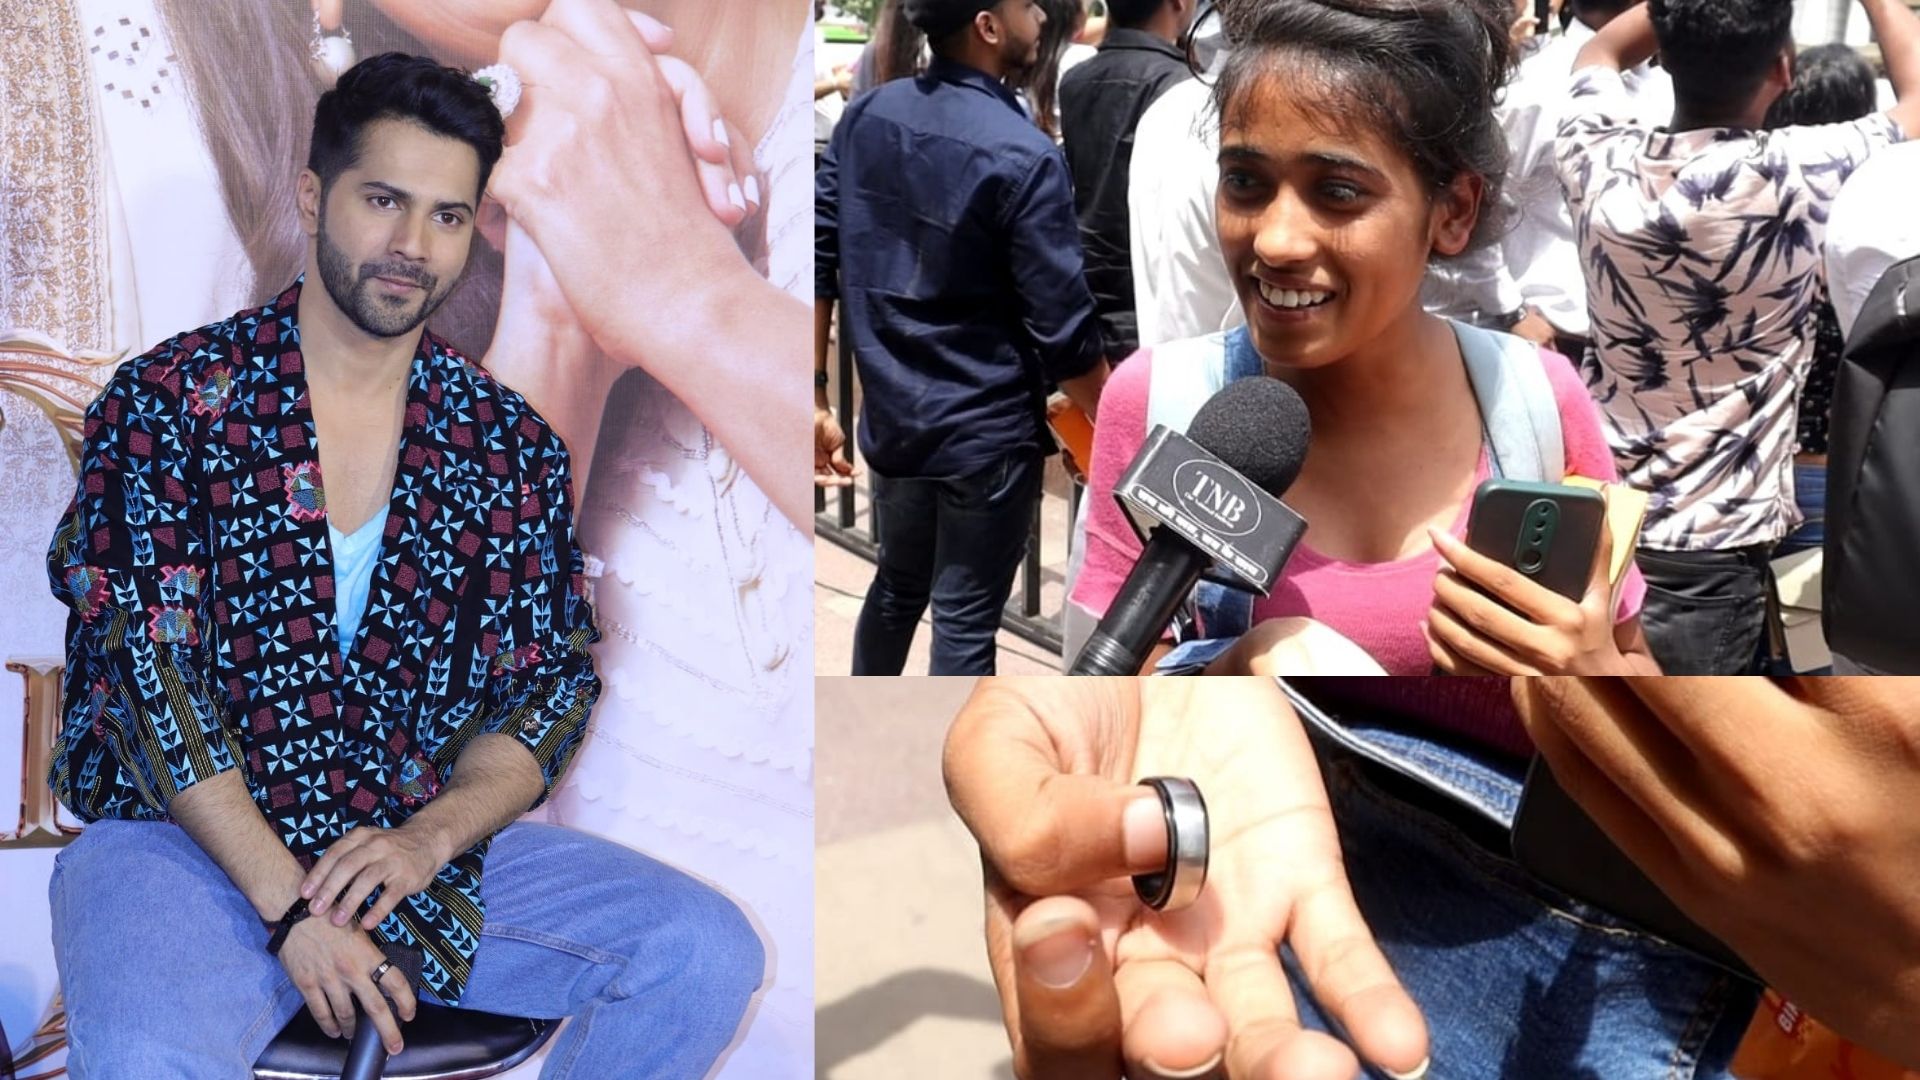 Varun Dhawan’s Ring slipped from his finger and fell into a Fan’s Hand, calls it 'Nature's Wonder'